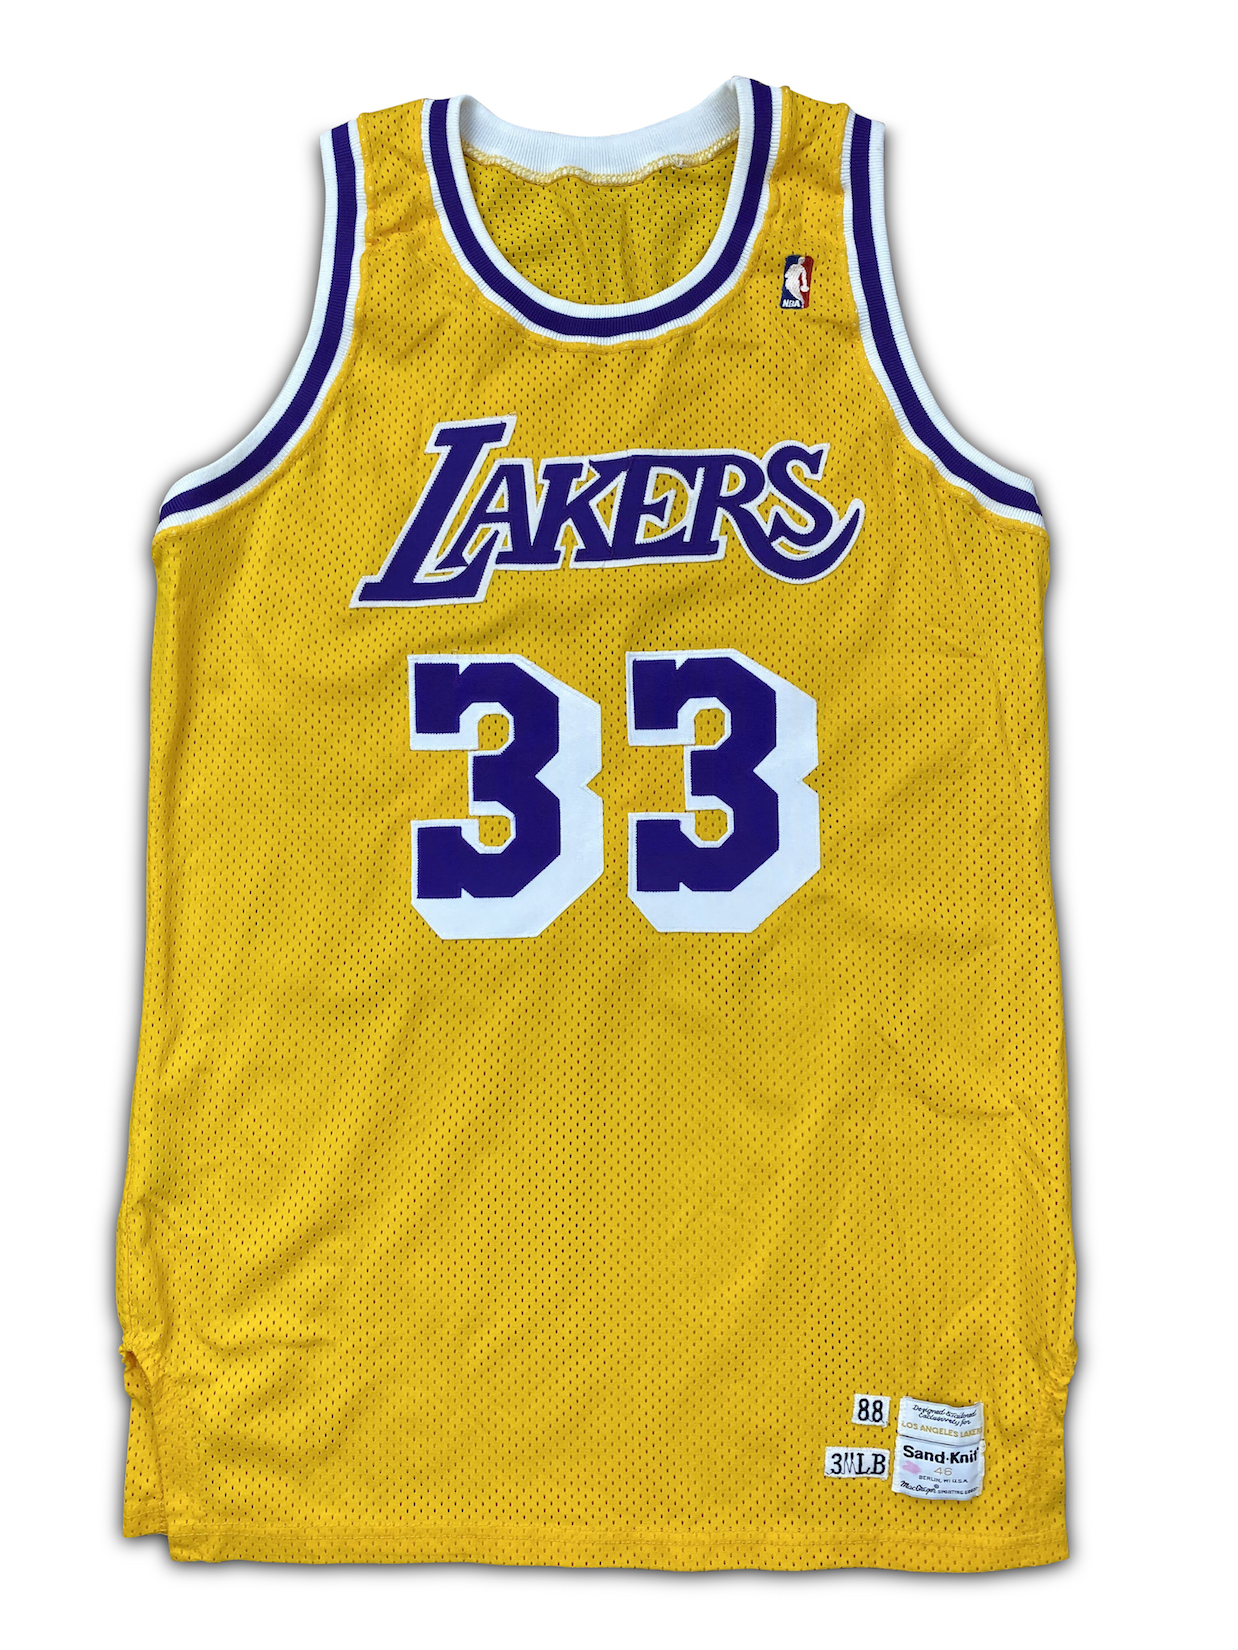 Kareem Abdul-Jabbar 1984 NBA Finals Los Angeles Lakers Game Worn Jersey, Matched to Multiple Games, ZENITH, PART II, 2023